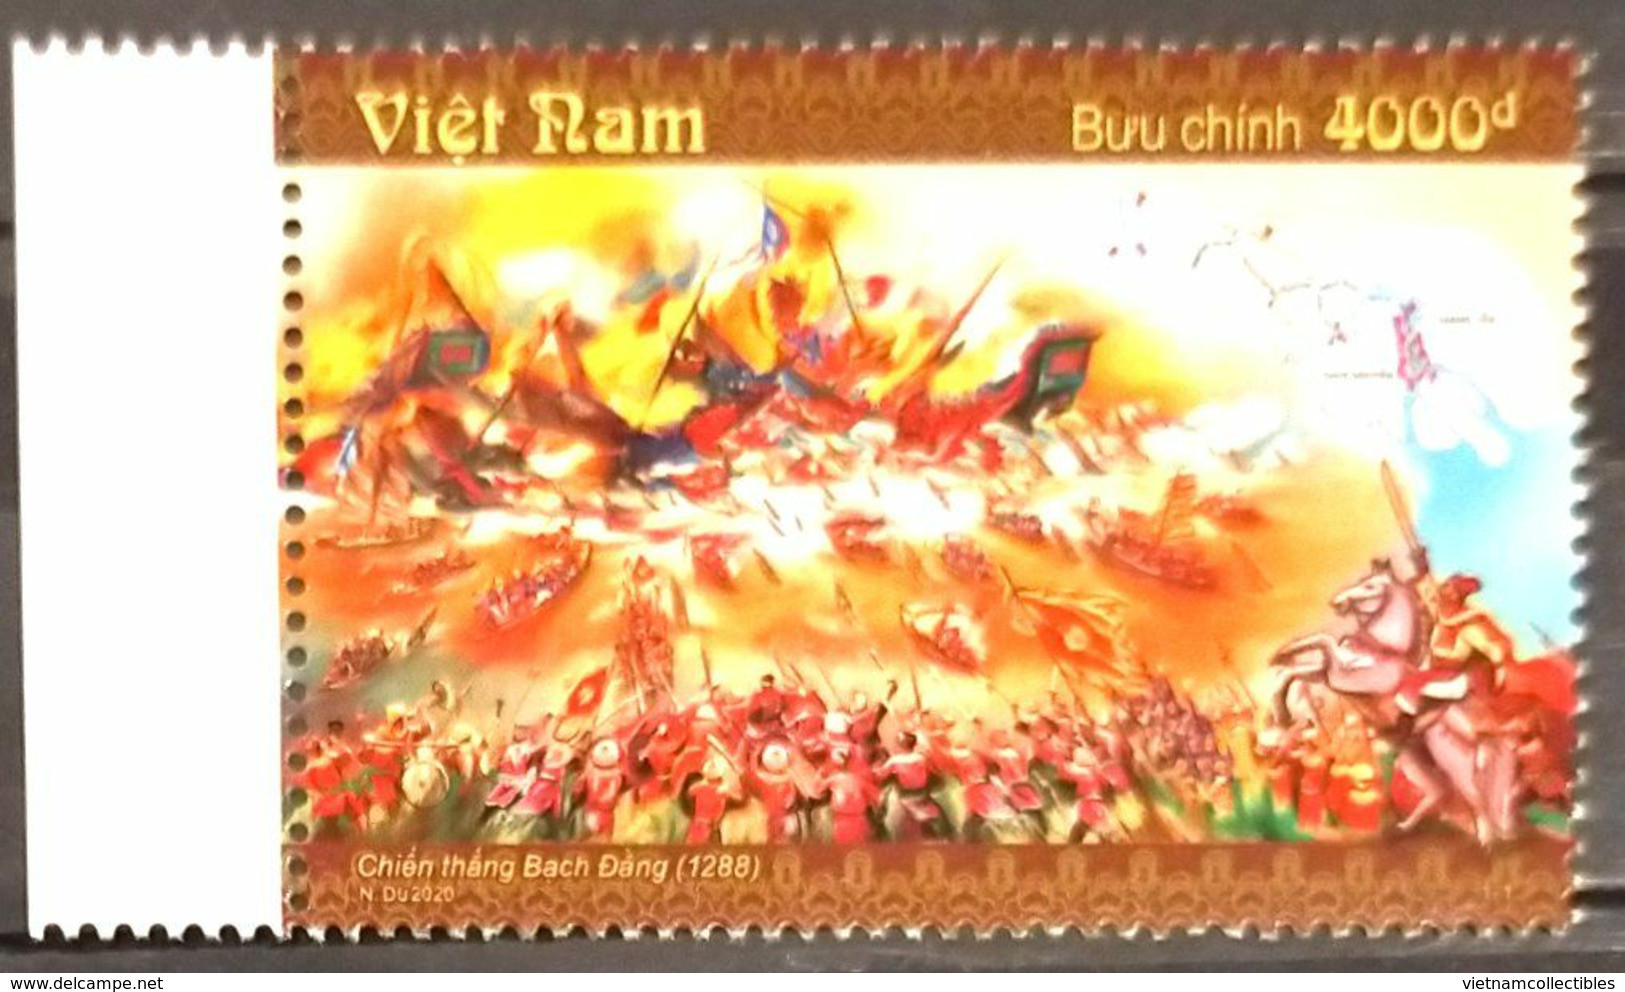 Vietnam Viet Nam MNH Perf Stamp 2020 : 132th Anniversary Of Bach Dang Victory Against China / Horse / Flag (Ms1125) - Vietnam